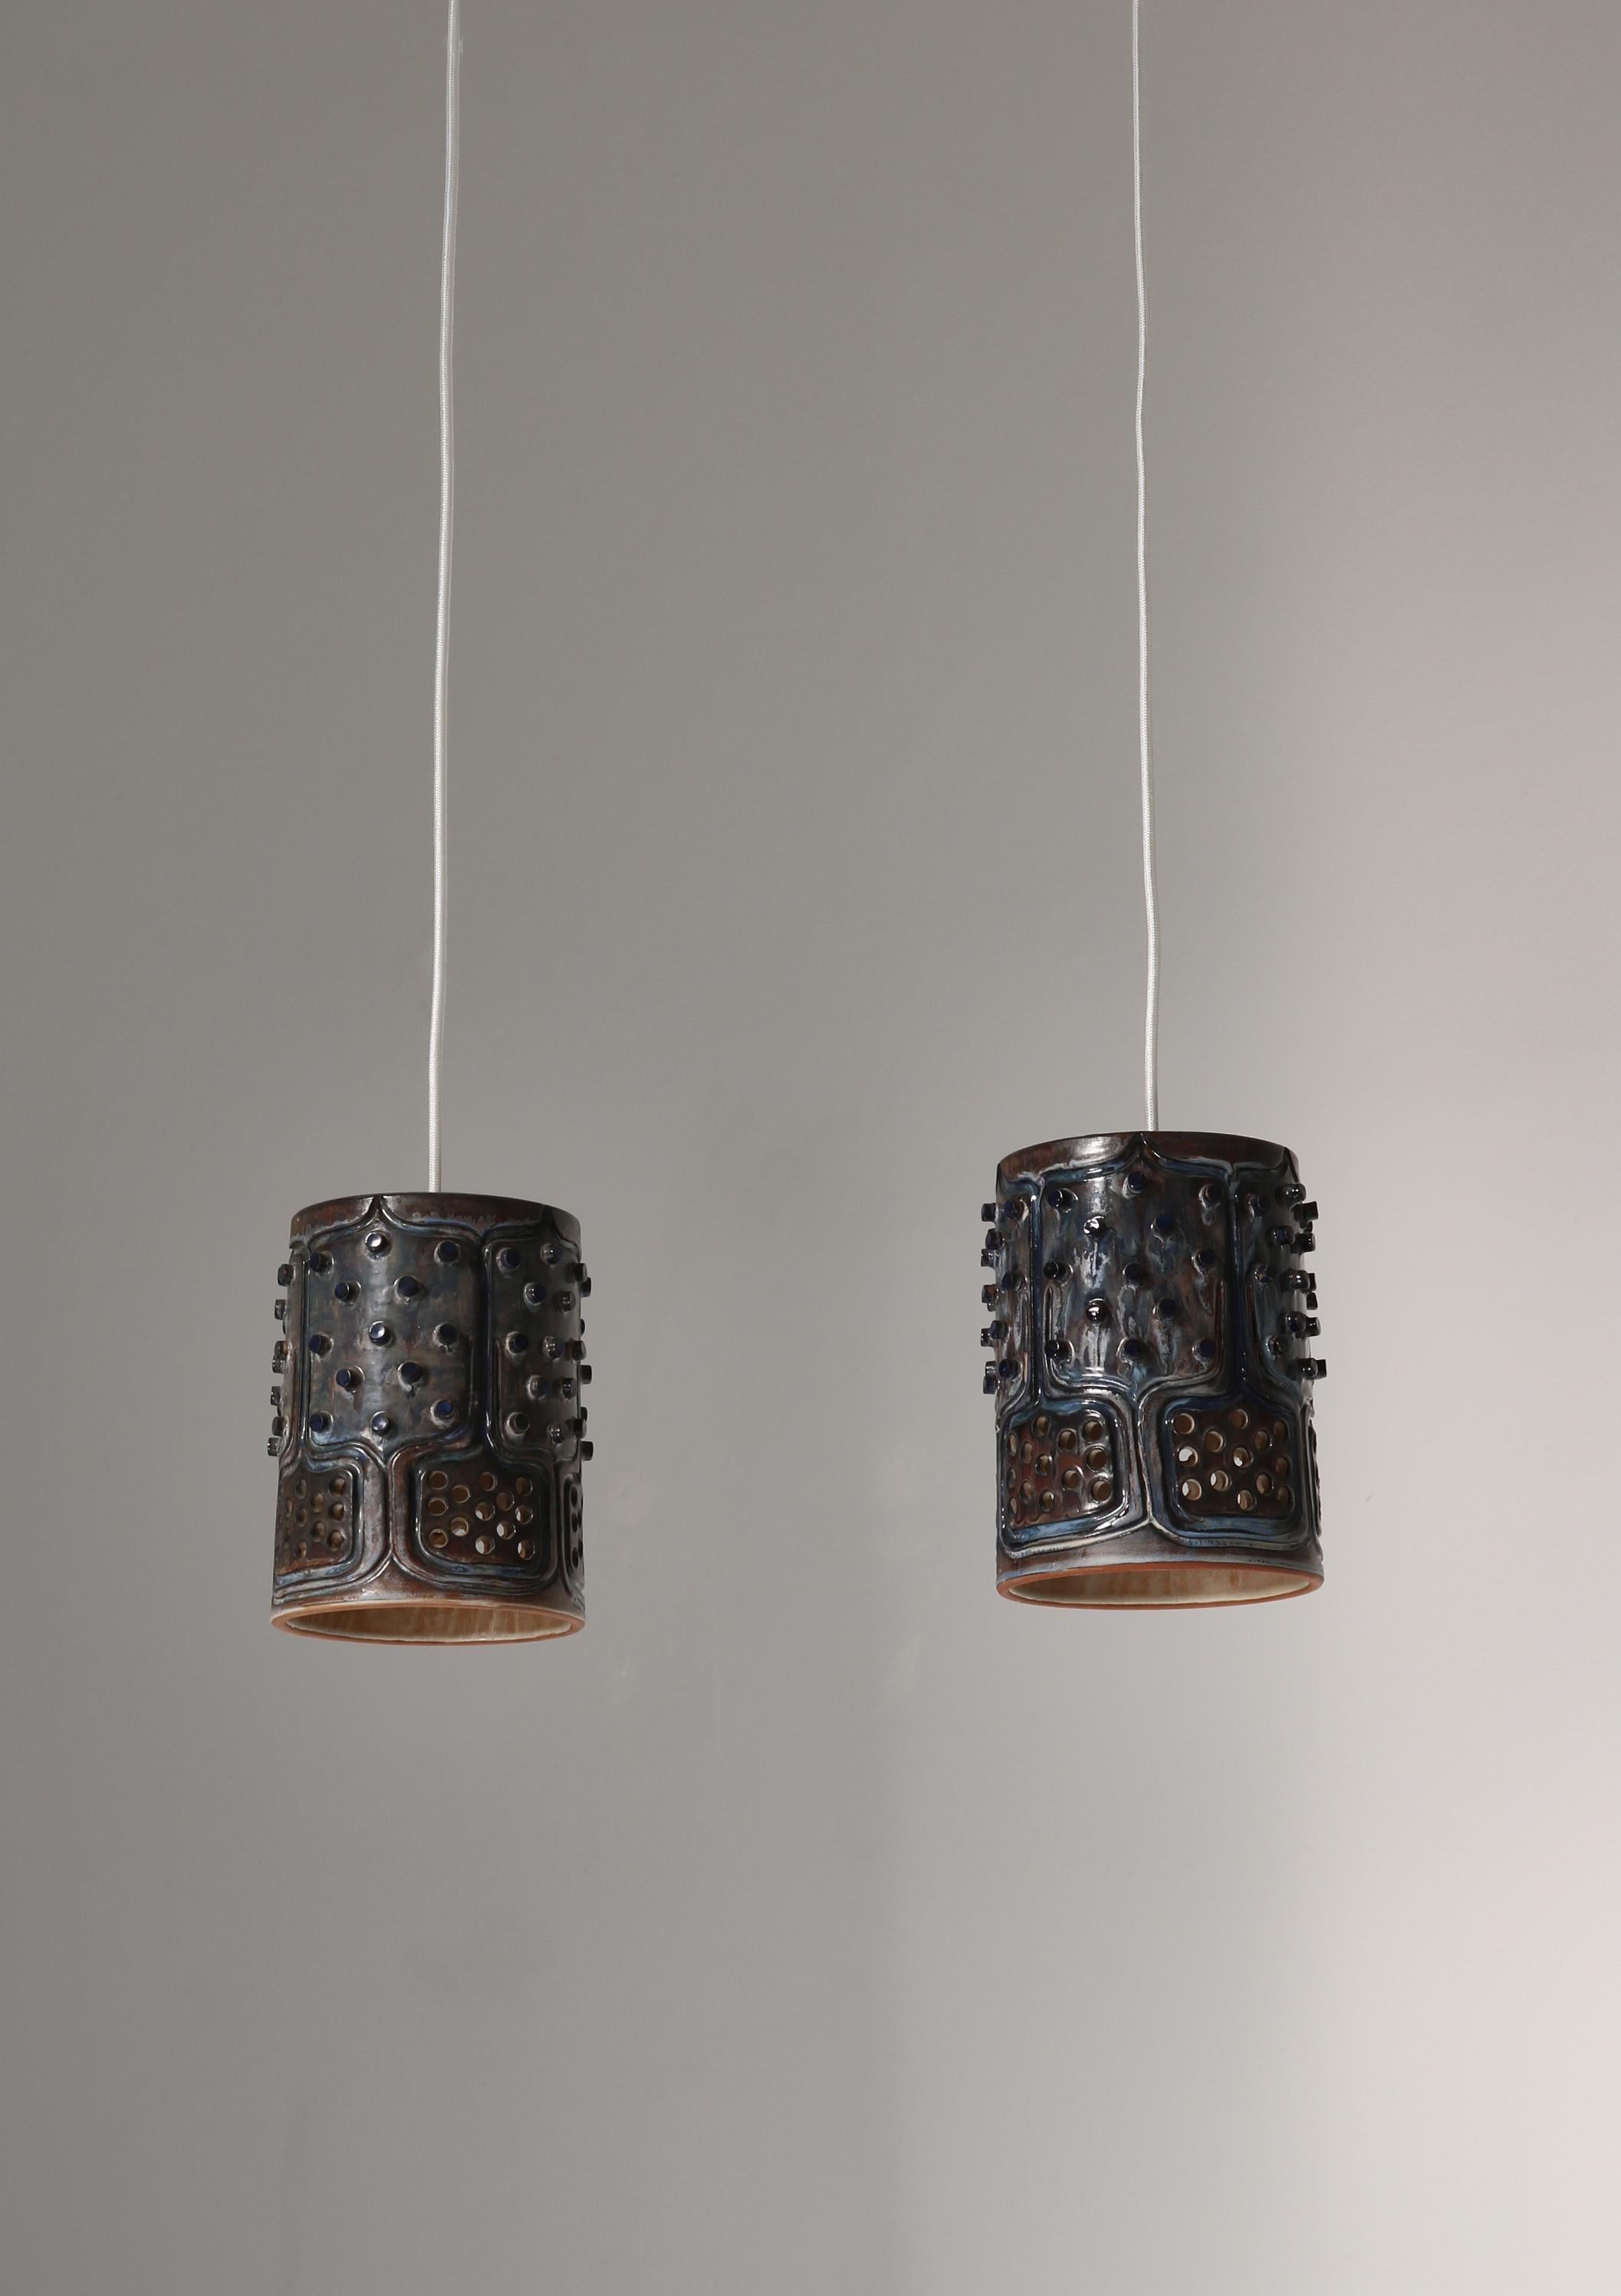 Unique pendants handmade in the 1970s by artist Jette Hellerøe at Axella studio, Denmark. The lamps are made from stoneware and finished in an expressive glossy glazing in blue colors. Stamped with 